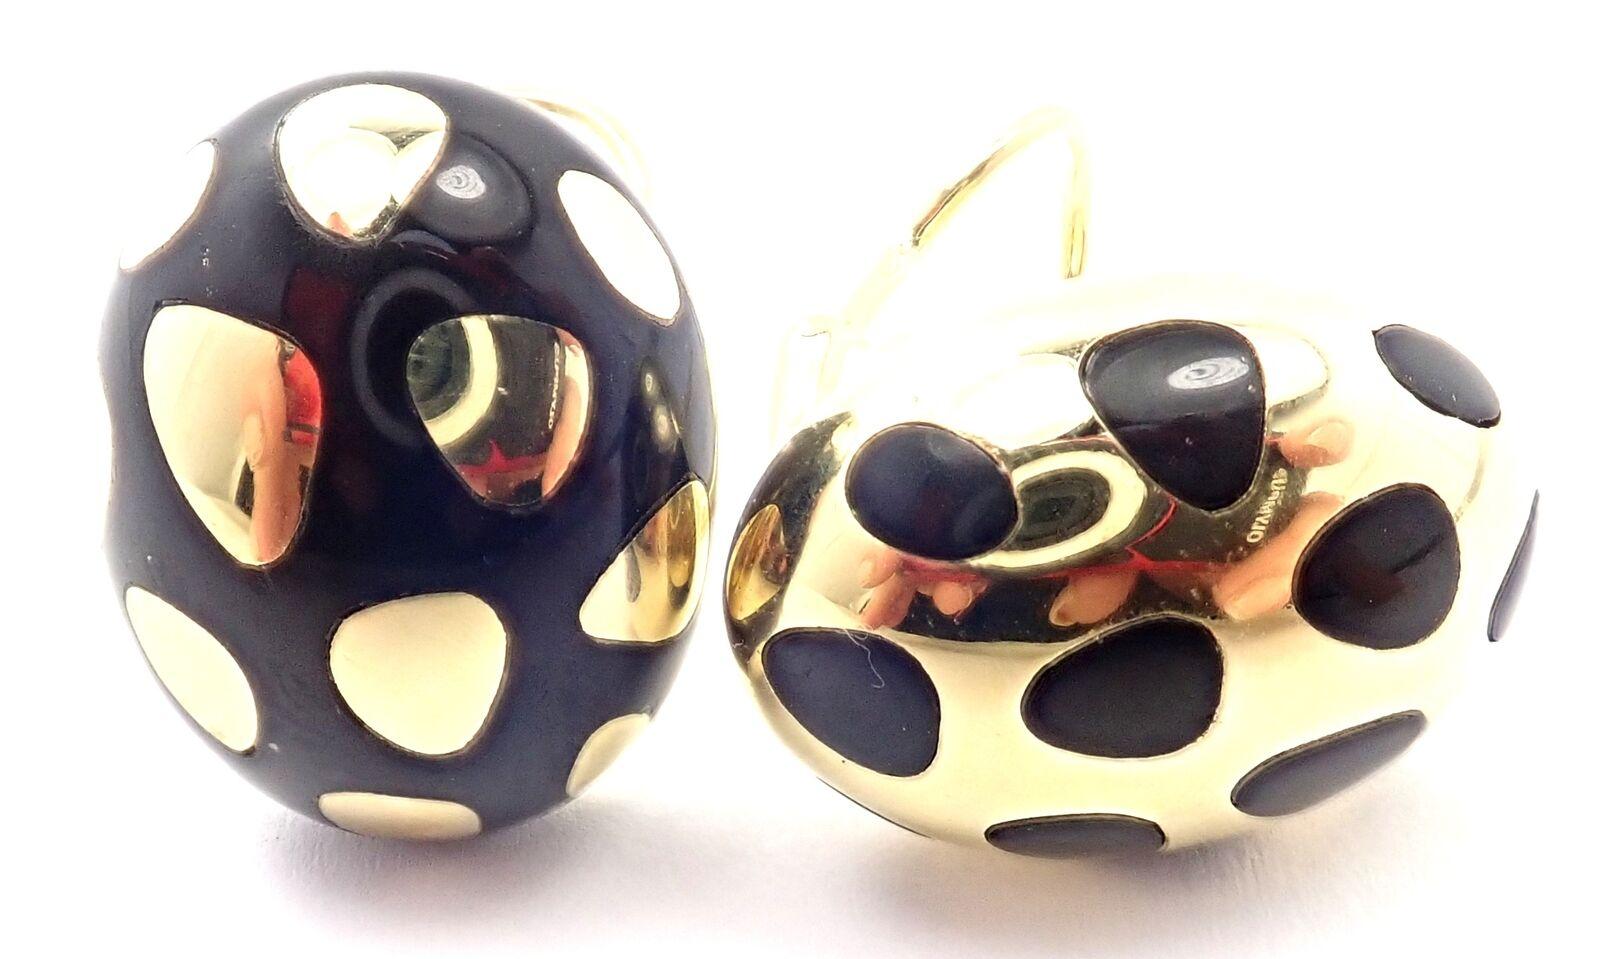 18k Yellow Gold Black Jade Positive And Negative Earrings by Angela Cummings for Tiffany & Co.
With Black Jade Inlay.
These earrings are for pierced ears.
Details:
Weight: 22.7 grams
Measurements: 23mm x 18mm
Stamped Hallmarks: T& Co 18kt
*Free